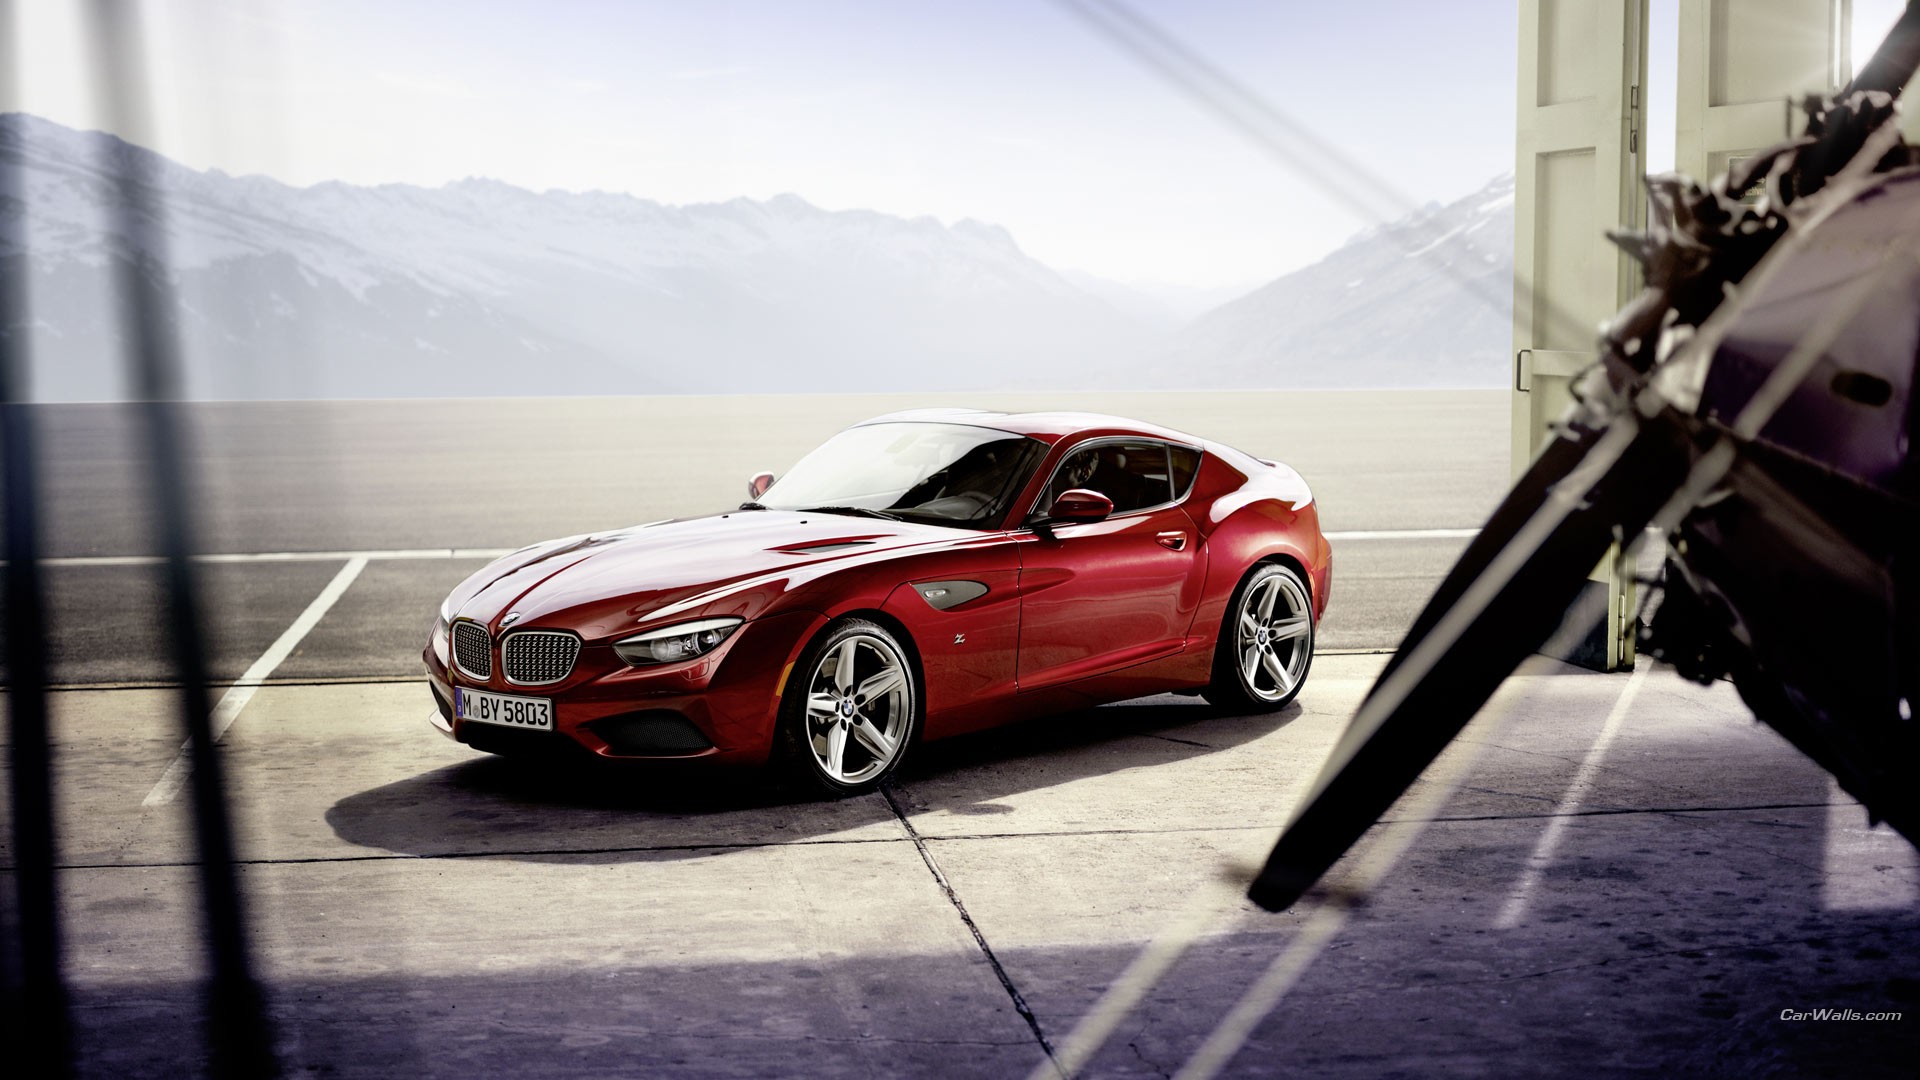 General 1920x1080 car BMW red cars coupe BMW Z4 Zagato vehicle German cars